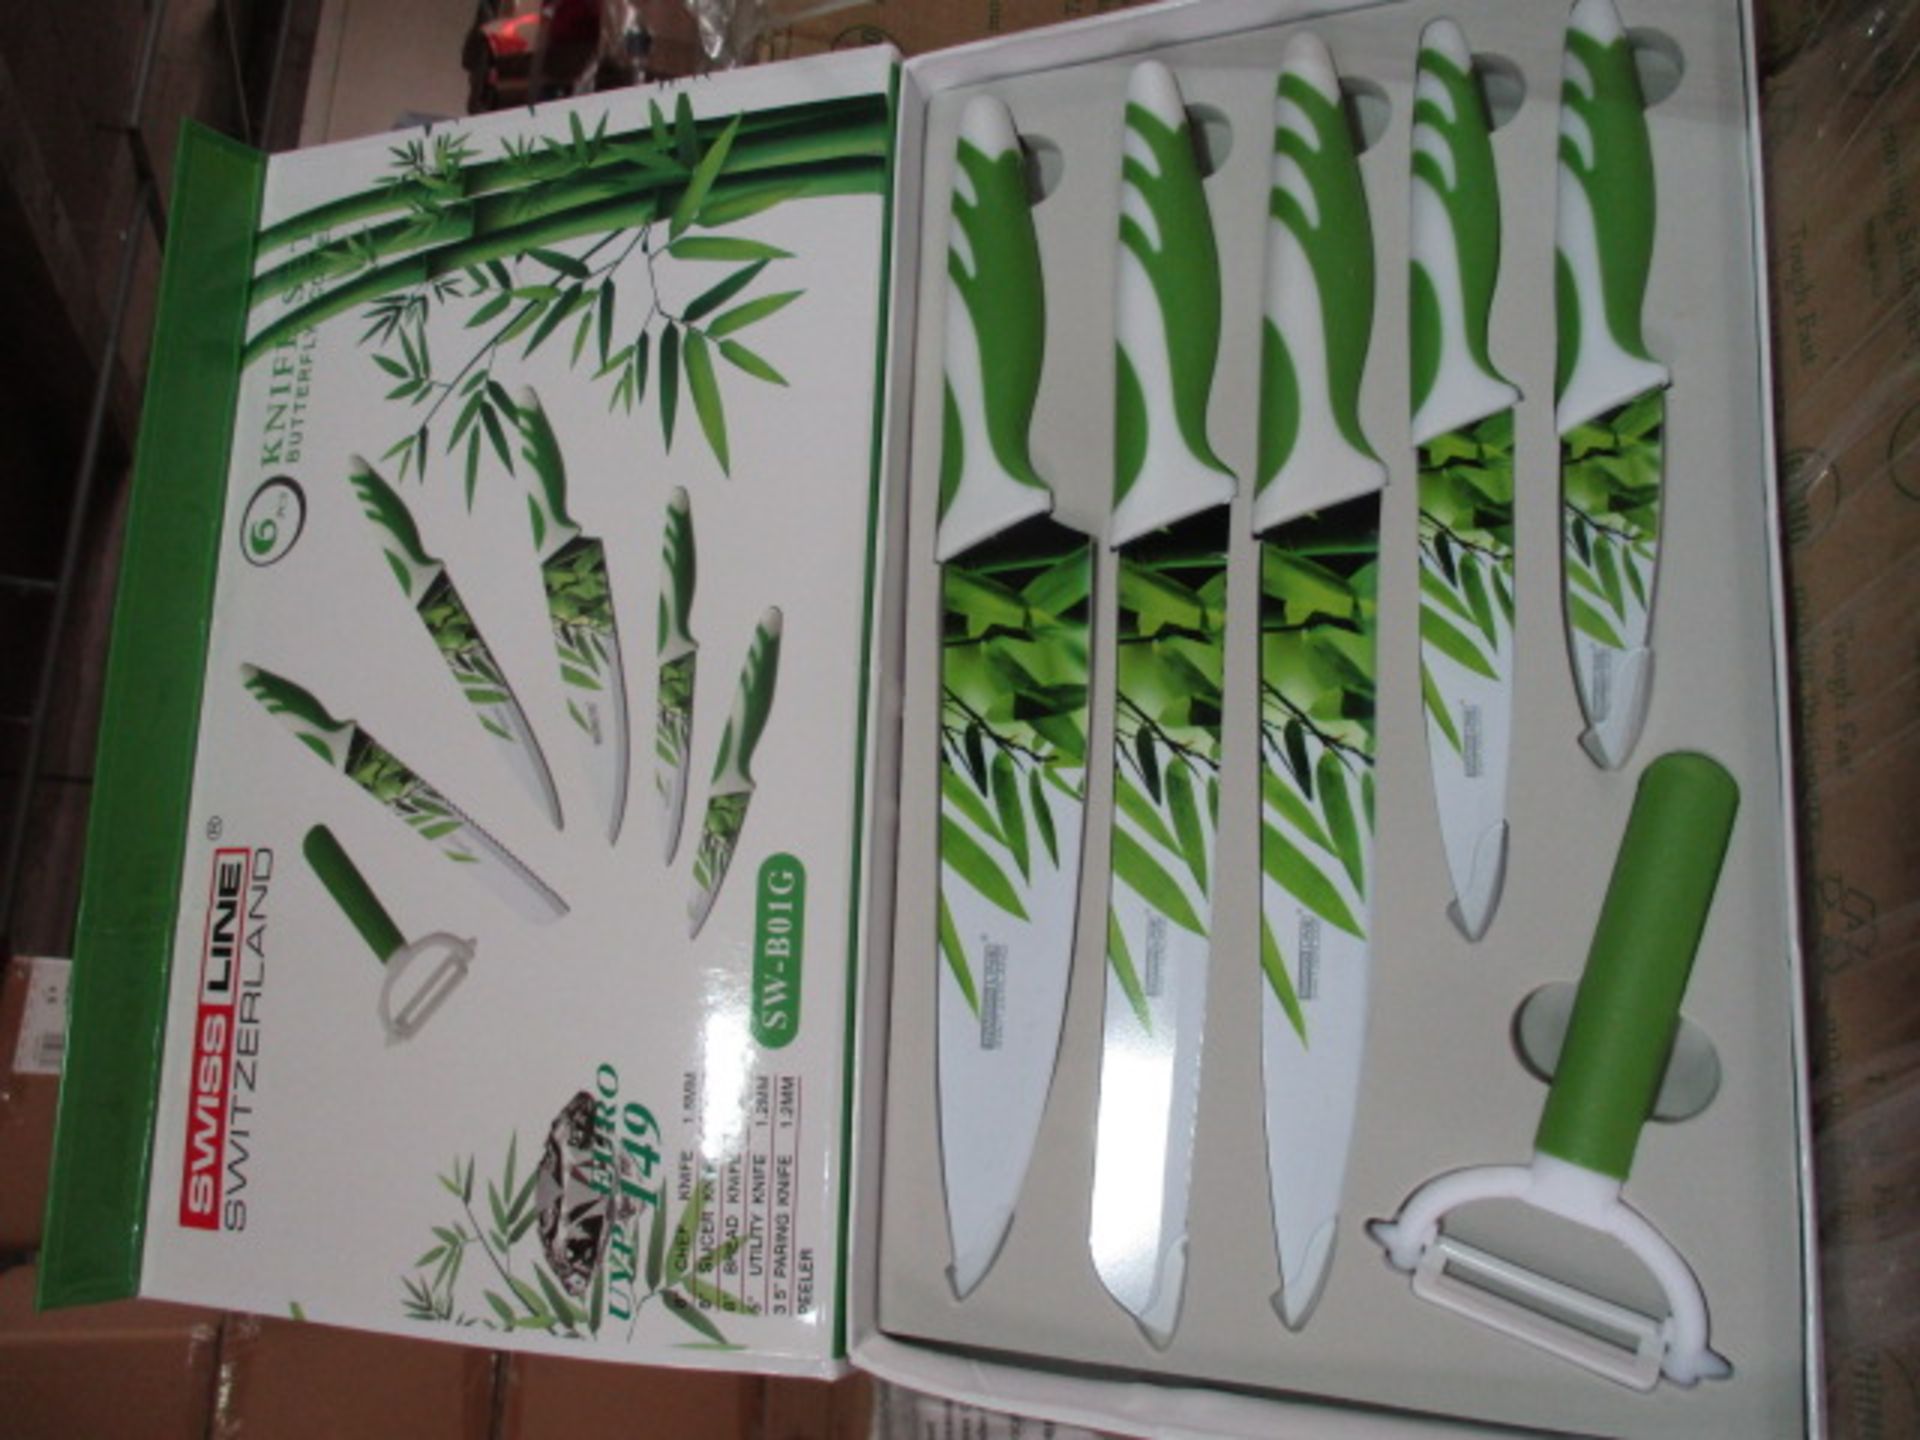 Brand new 6pc Knive set as pictured design rrp Euro 149.